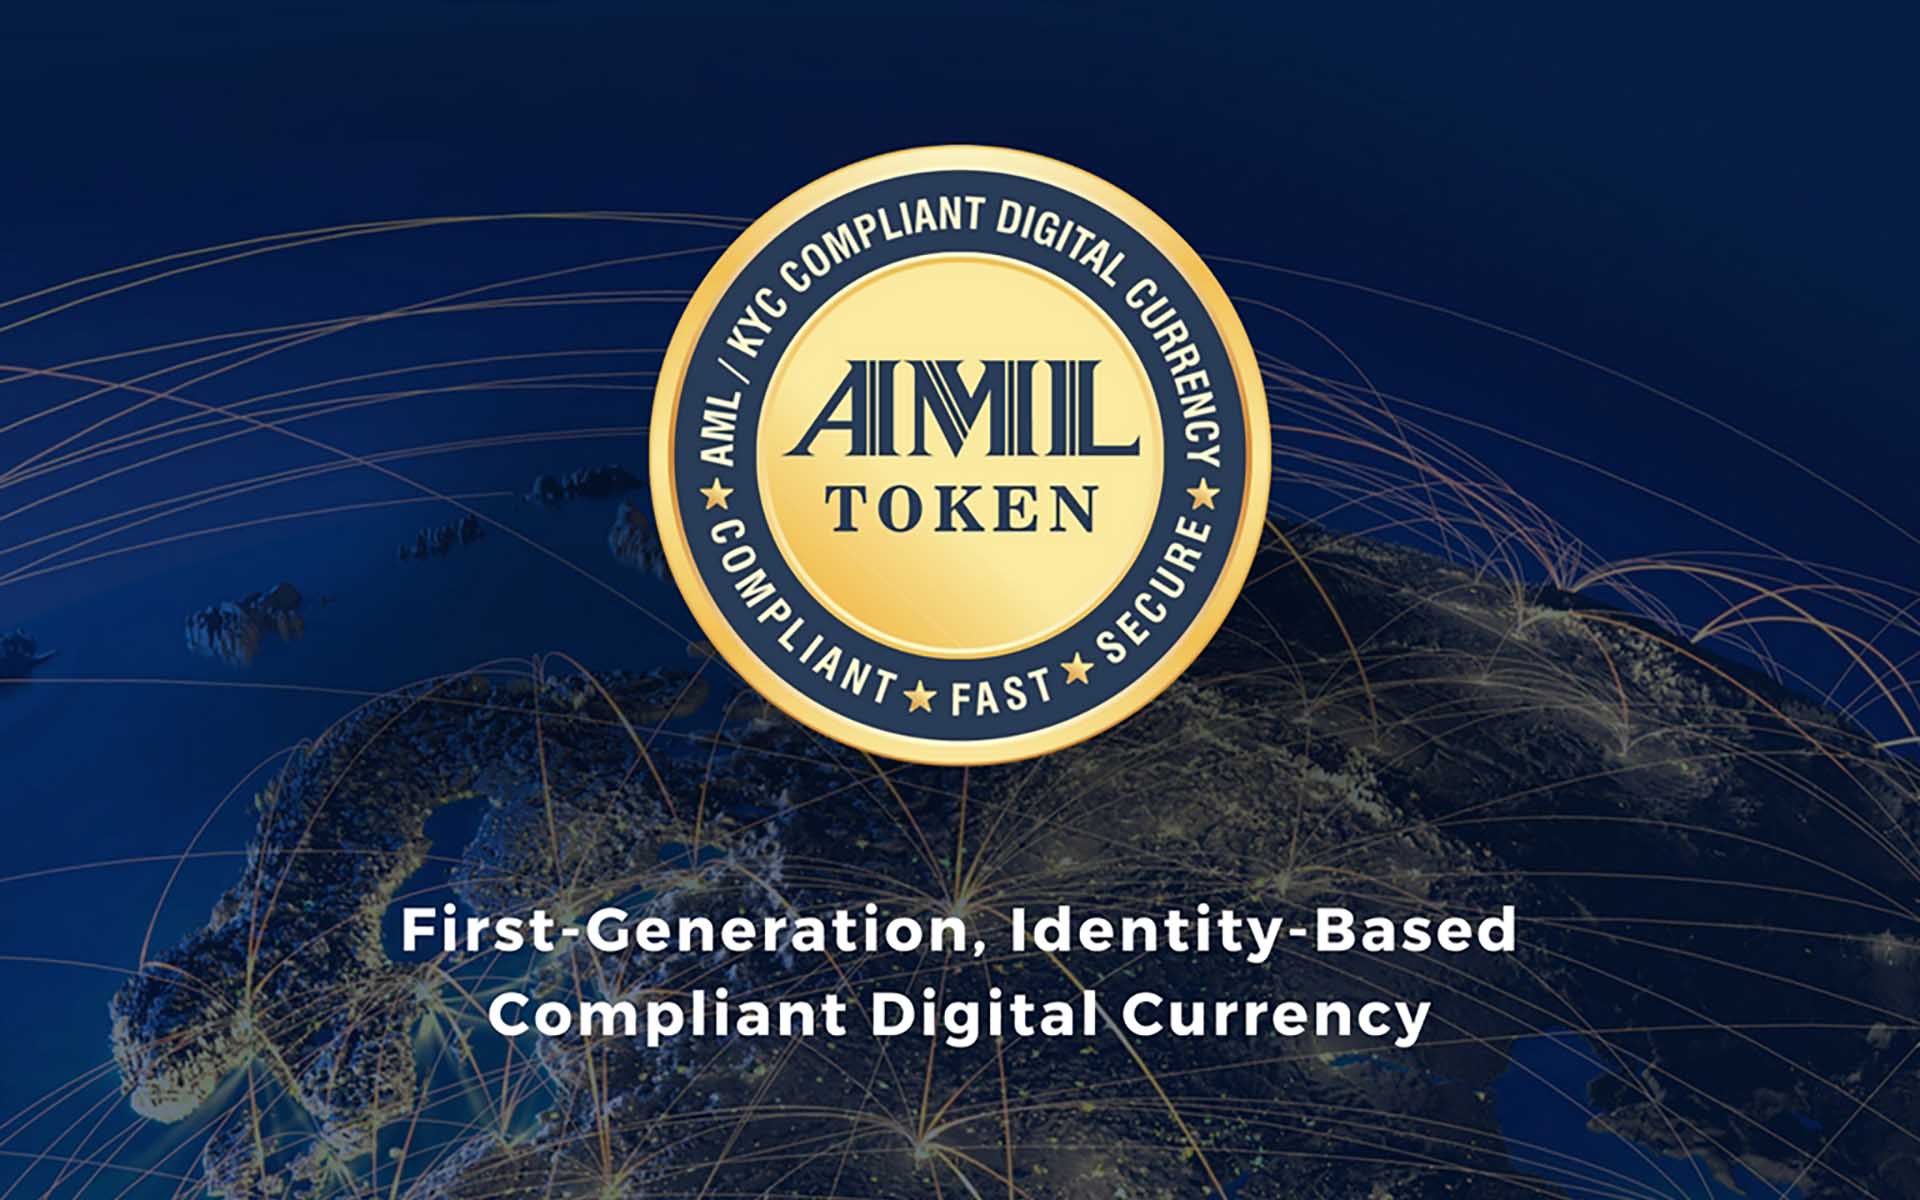 AML BitCoin Creator Saw Early Weakness in Digital Currency World, Innovated Solution and Filed Patents Well Before World Financial Leaders